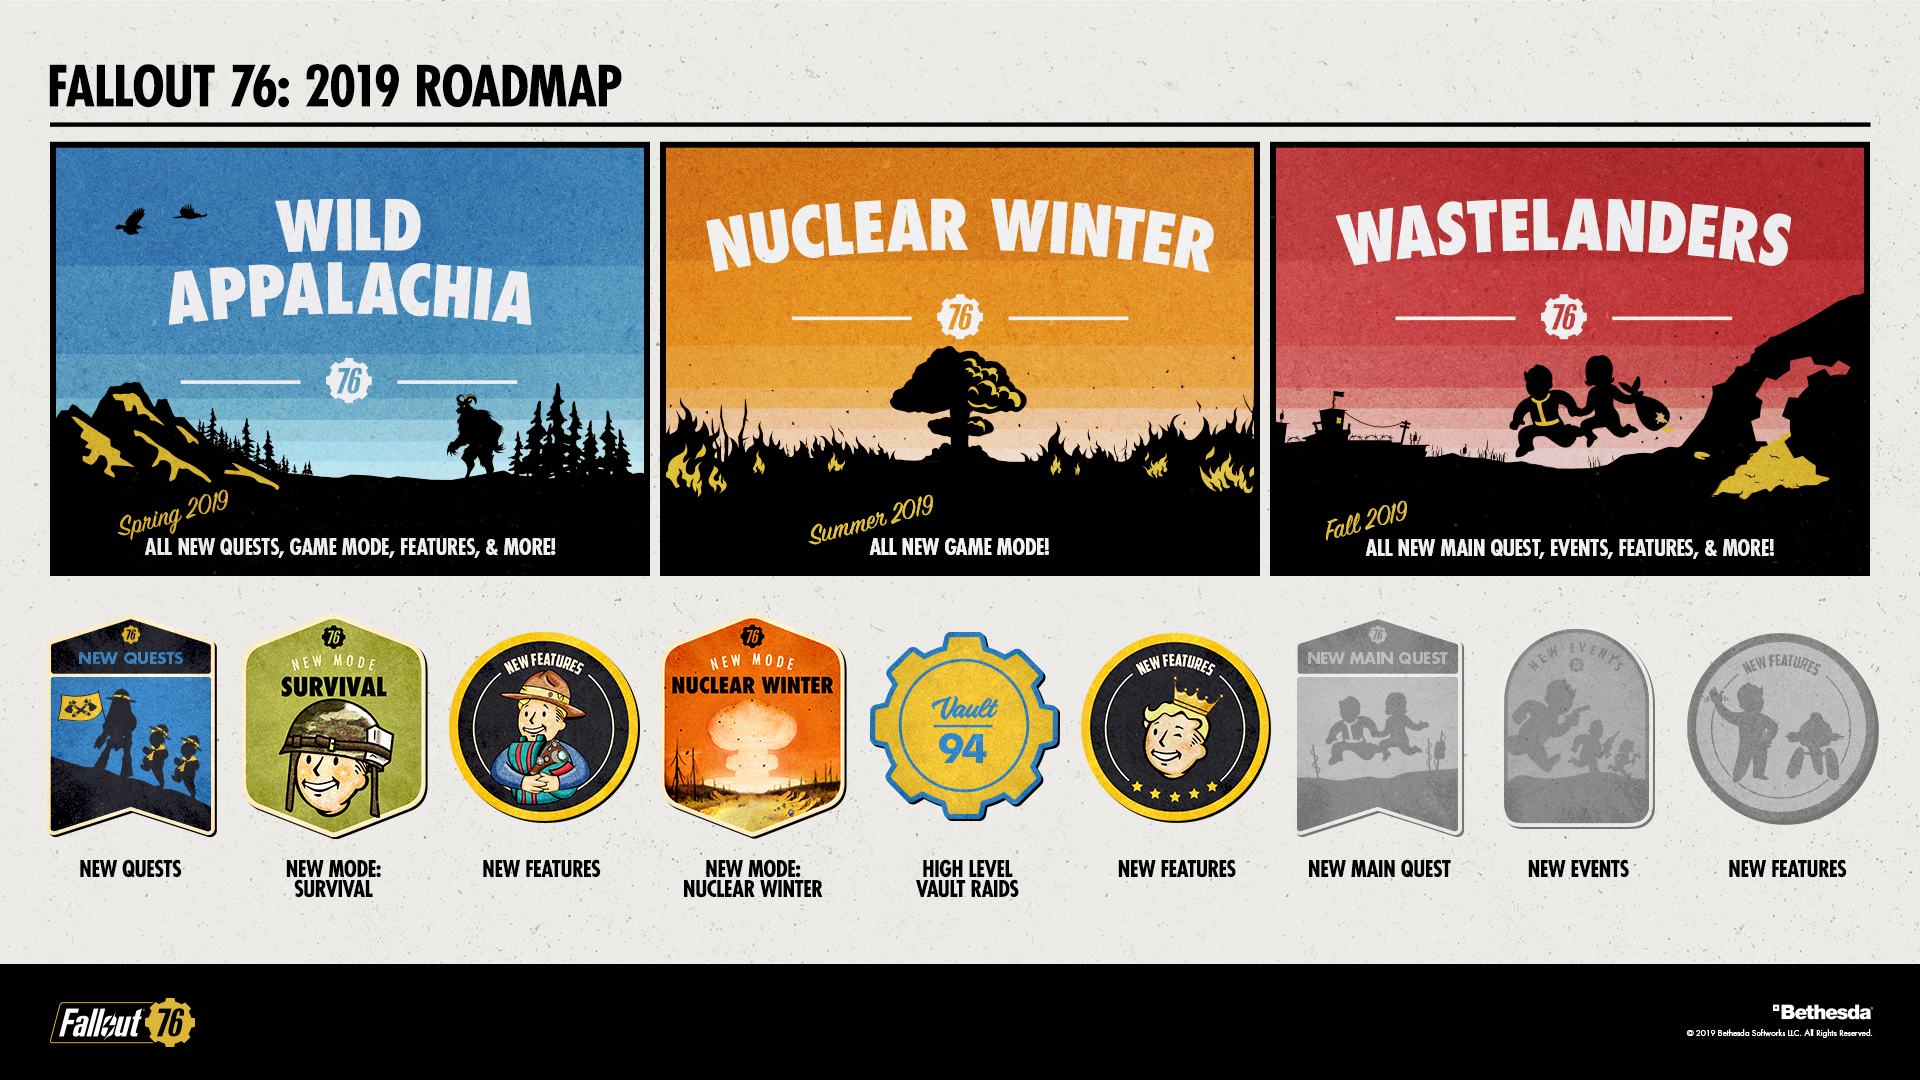 Fallout 76 roadmap has some good news